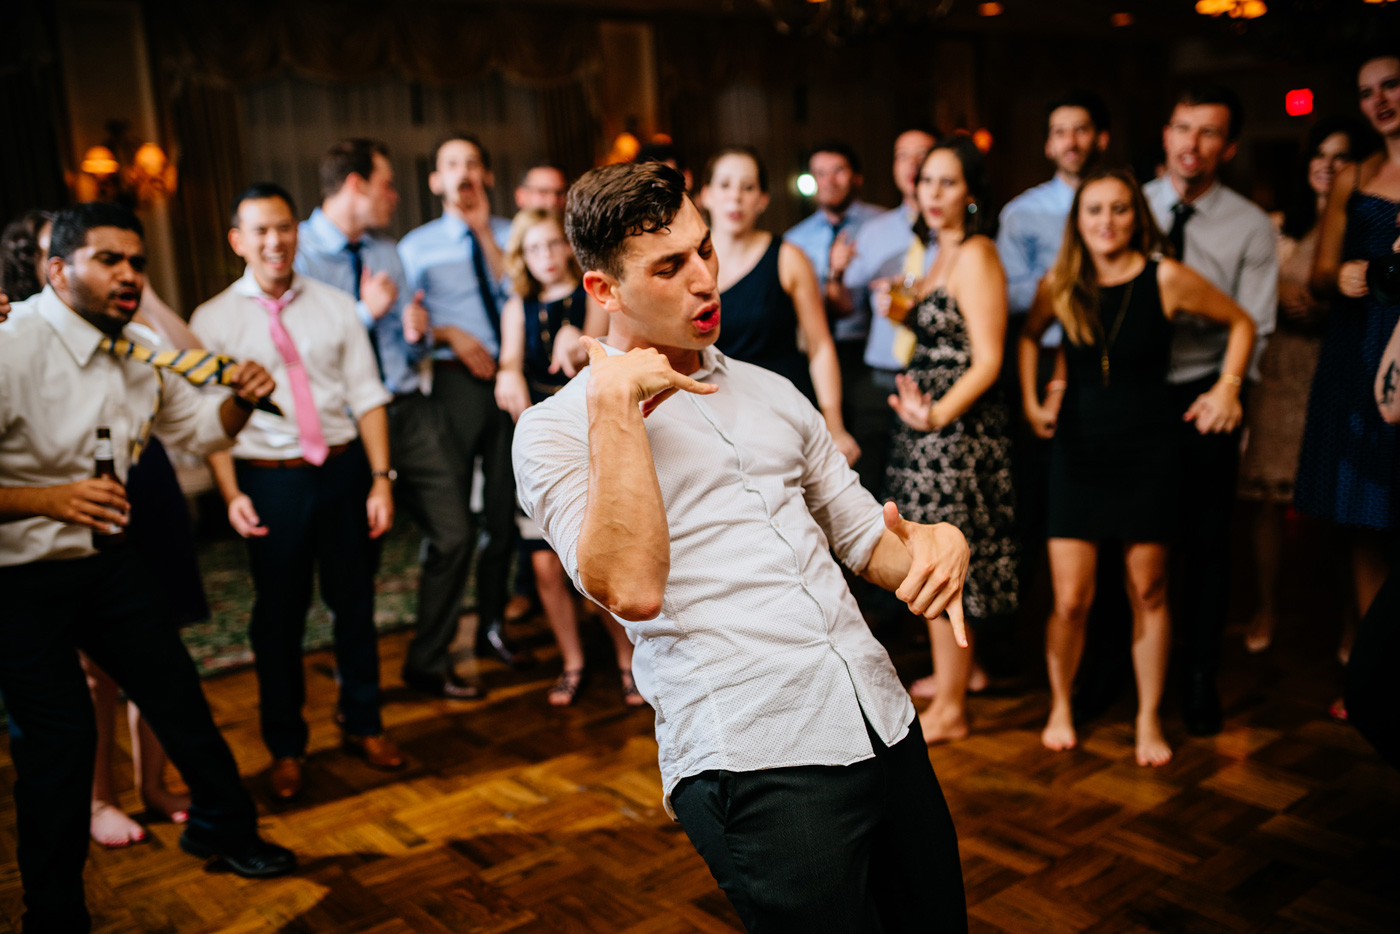 st clair country club wedding reception call me maybe